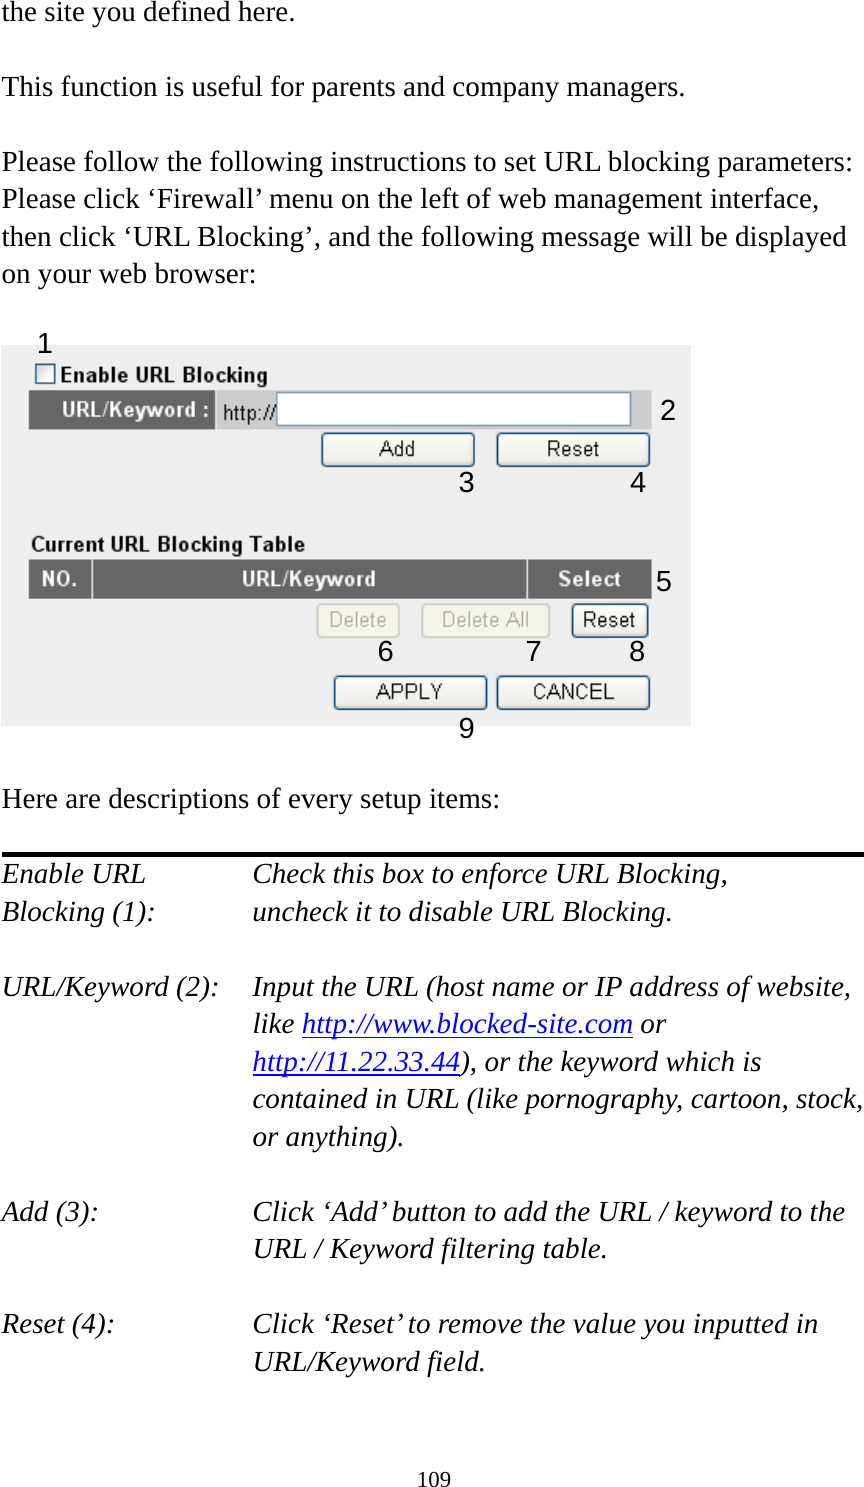 109 the site you defined here.  This function is useful for parents and company managers.  Please follow the following instructions to set URL blocking parameters: Please click ‘Firewall’ menu on the left of web management interface, then click ‘URL Blocking’, and the following message will be displayed on your web browser:    Here are descriptions of every setup items:  Enable URL      Check this box to enforce URL Blocking, Blocking (1):      uncheck it to disable URL Blocking.  URL/Keyword (2):    Input the URL (host name or IP address of website, like http://www.blocked-site.com or http://11.22.33.44), or the keyword which is contained in URL (like pornography, cartoon, stock, or anything).  Add (3):    Click ‘Add’ button to add the URL / keyword to the URL / Keyword filtering table.  Reset (4):    Click ‘Reset’ to remove the value you inputted in URL/Keyword field.  2 3 4 5 6 7 8 9 1 